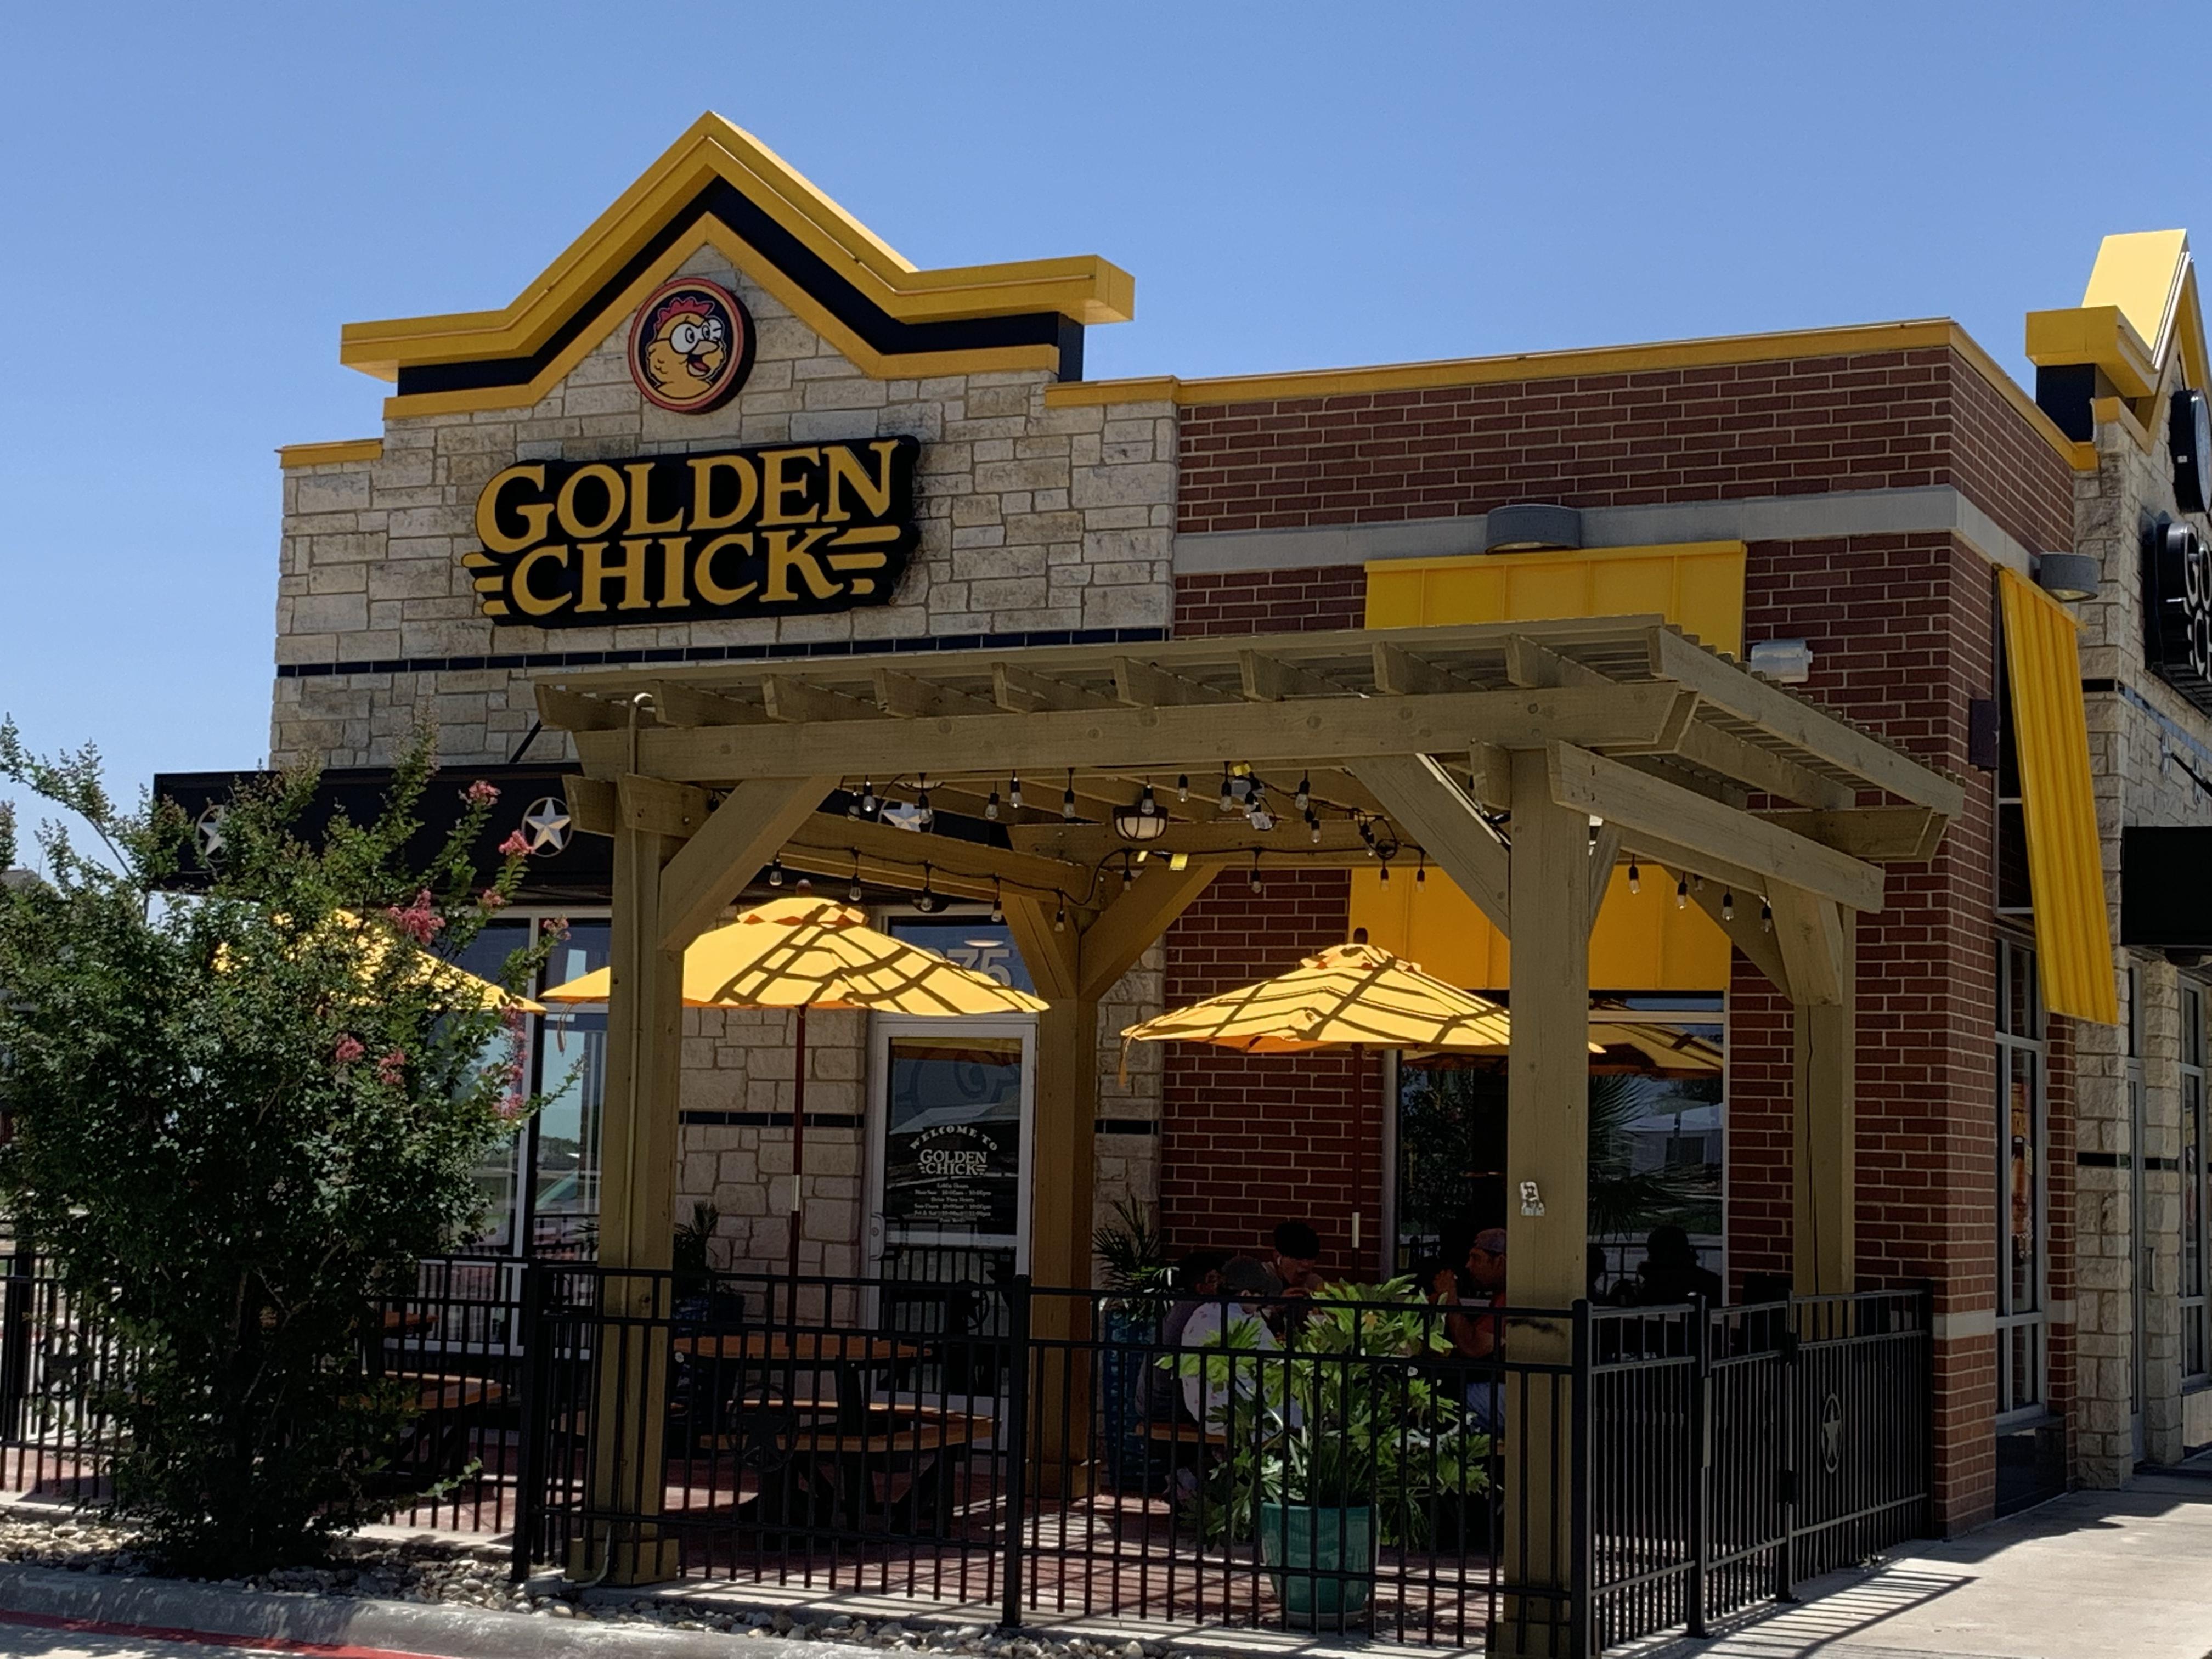 Golden Chick storefront.  Your local Golden Chick fast food restaurant in Hondo, Texas